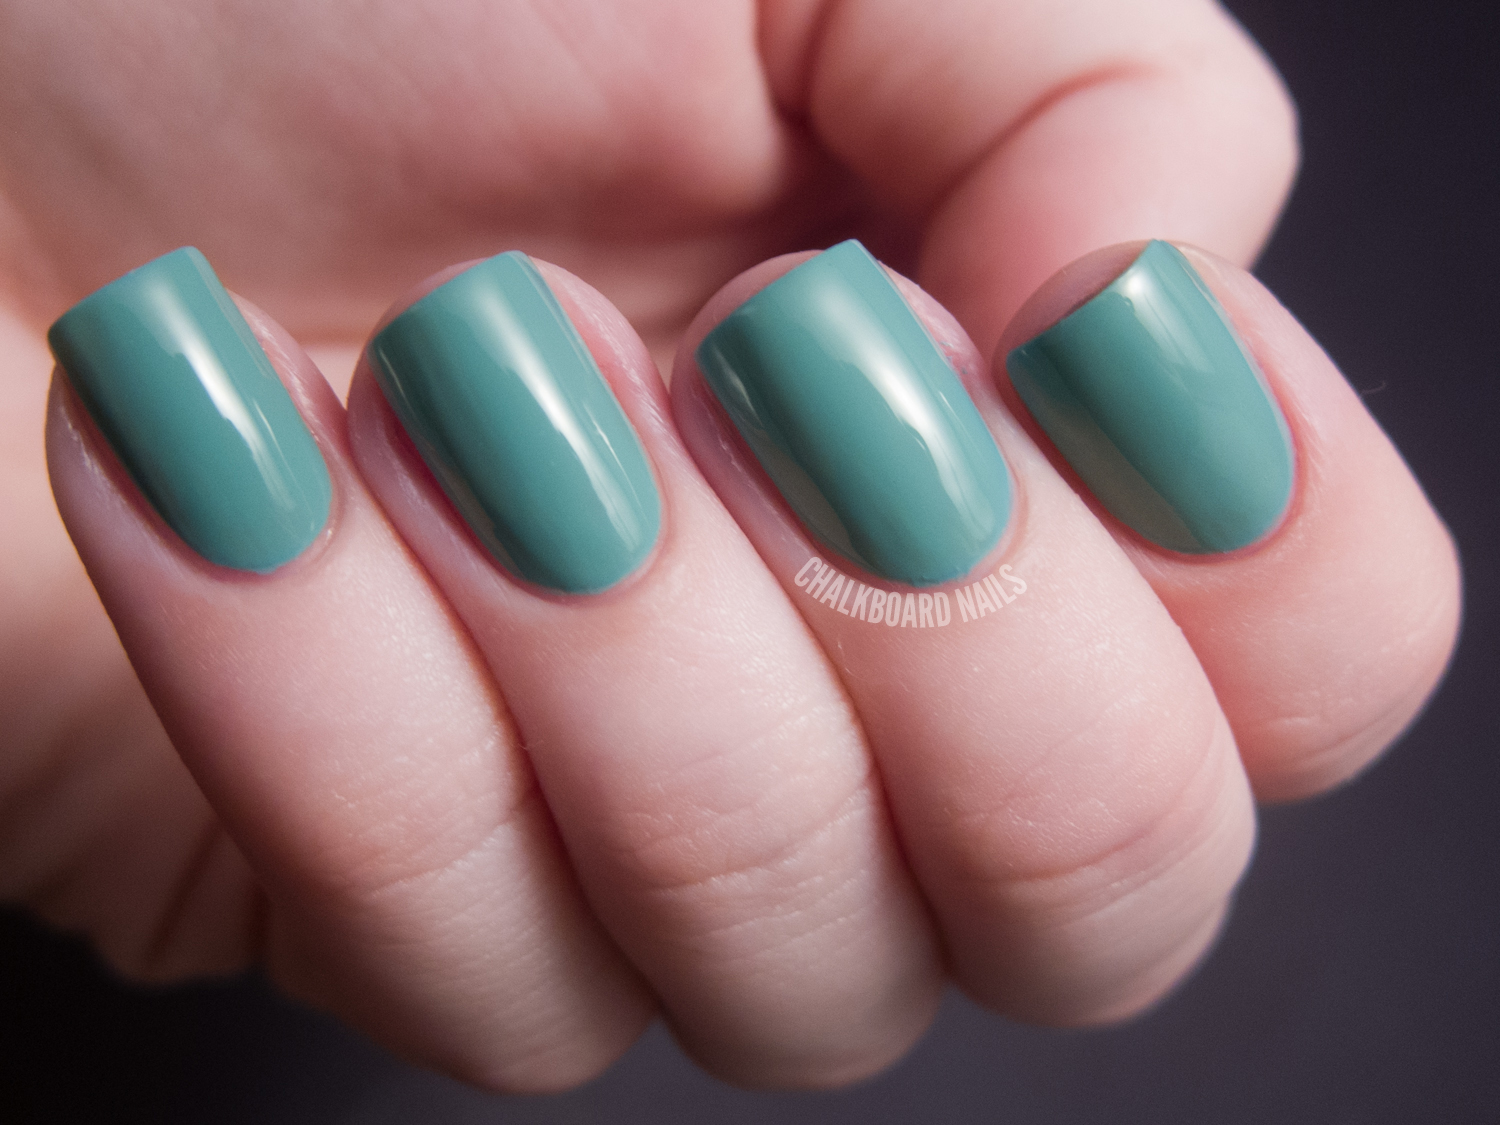 Sheswai Nail Polish in "For Real" Color - wide 9